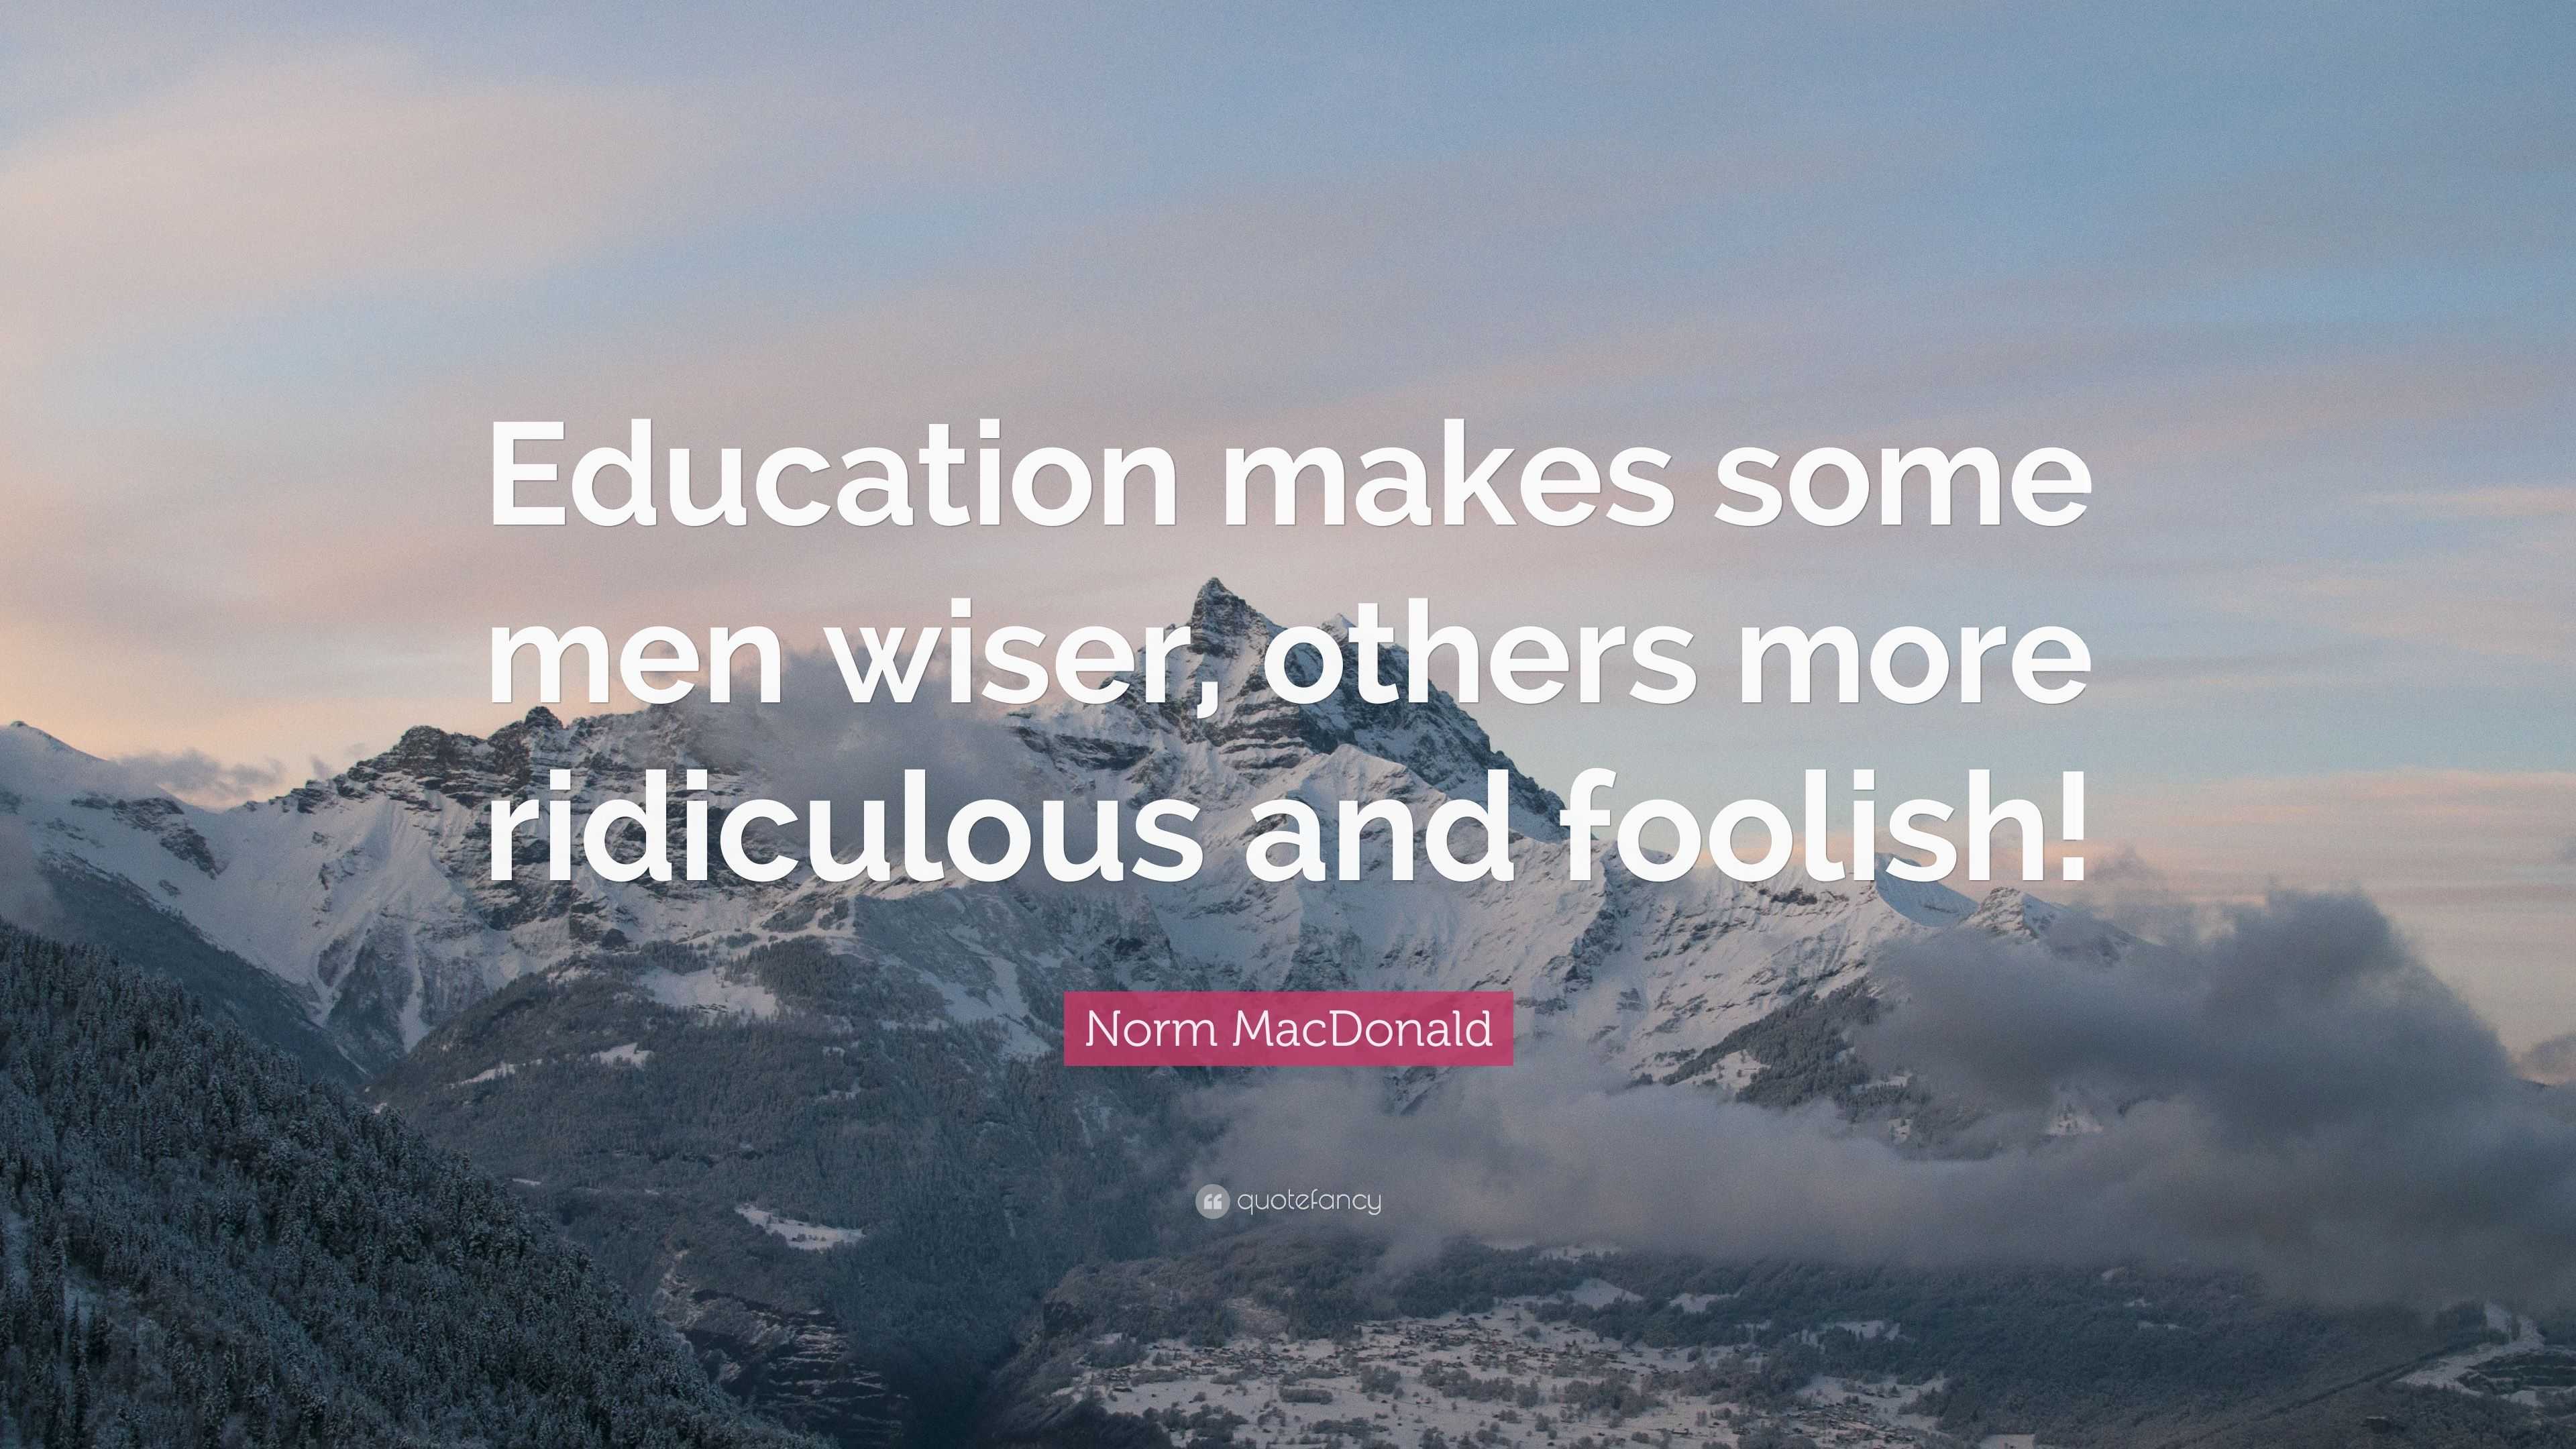 Norm MacDonald Quote: “Education makes some men wiser, others more ...